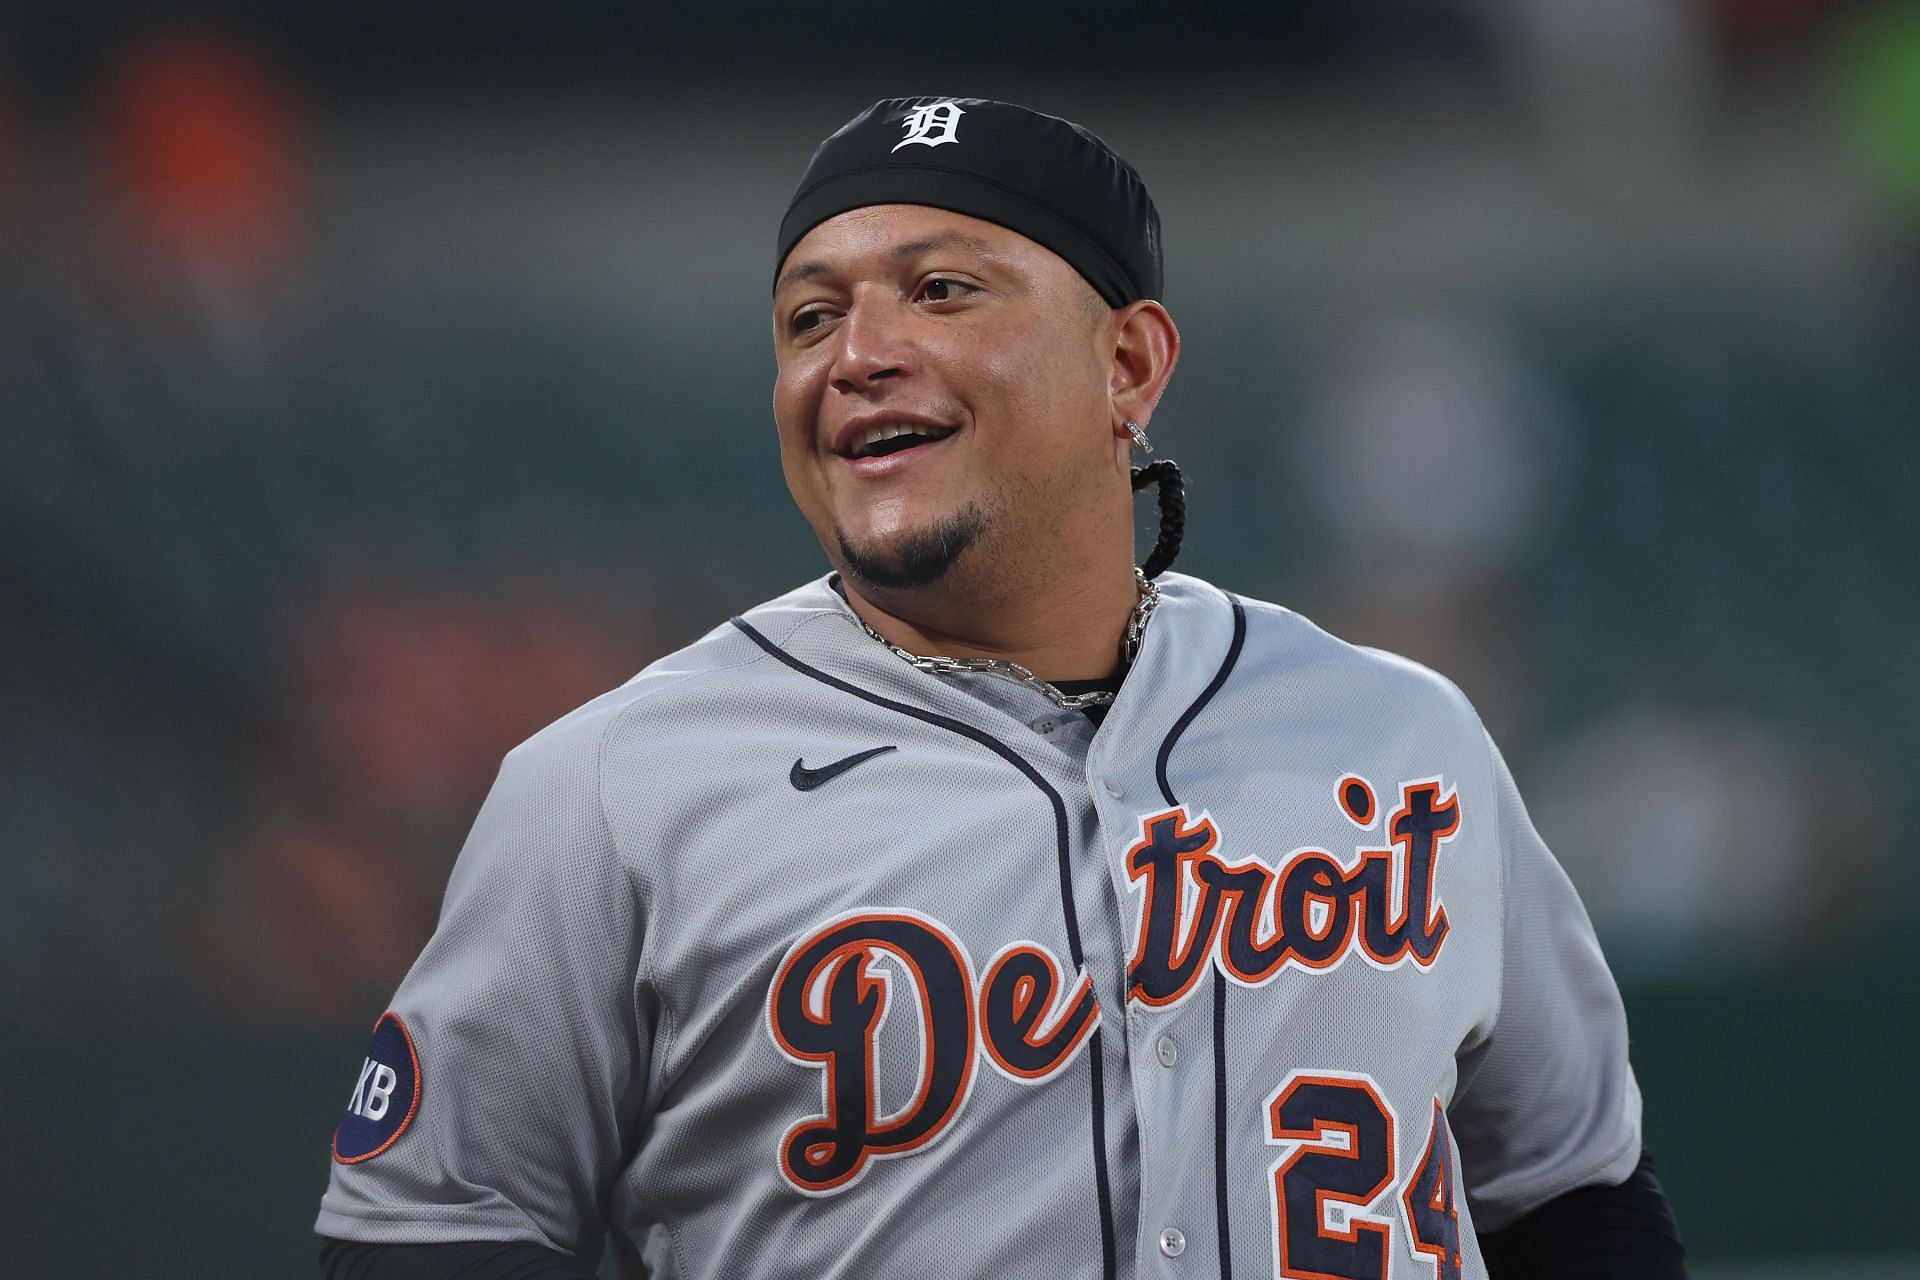 Detroit Tigers to change outfield dimensions at Comerica Park